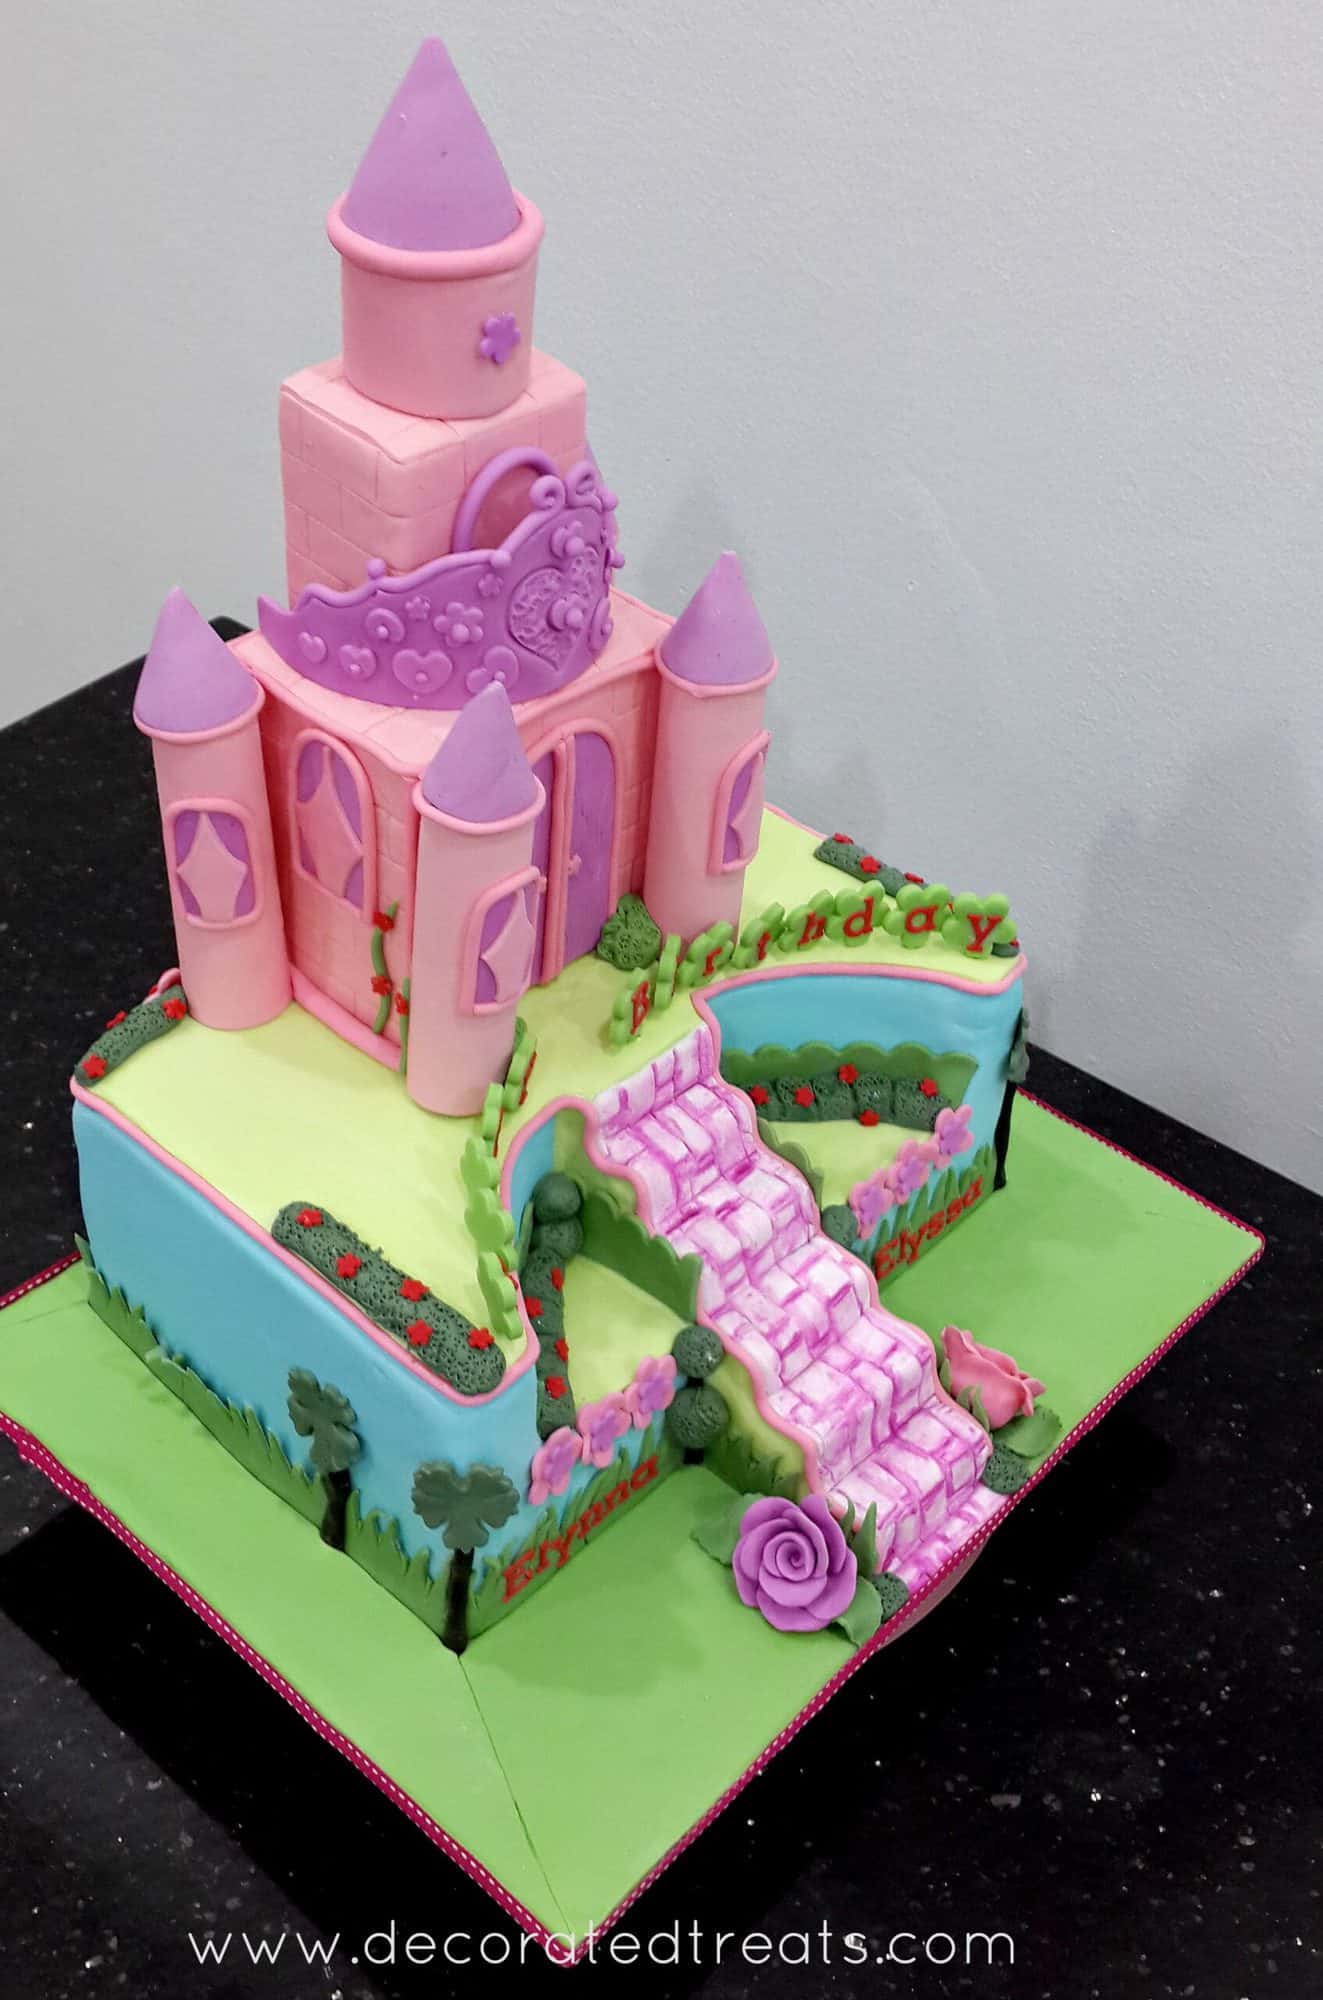 A rectangle cake with a pink castle cake topper